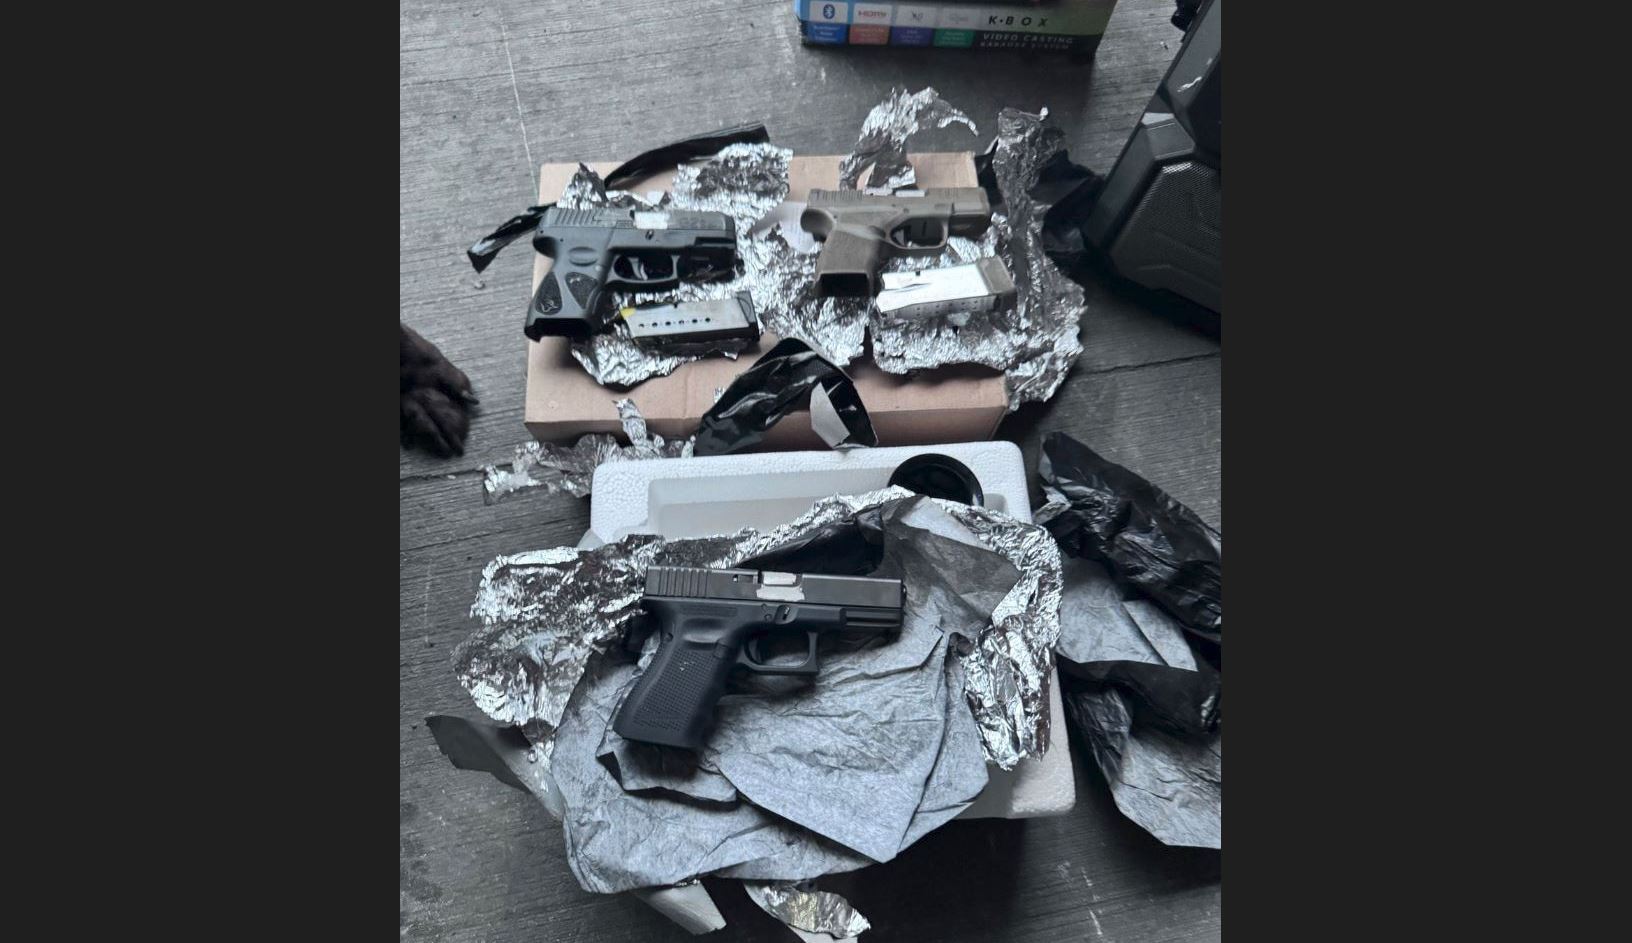 Caribbean Nationals In The U.S. Aiding Illegal Guns Trade